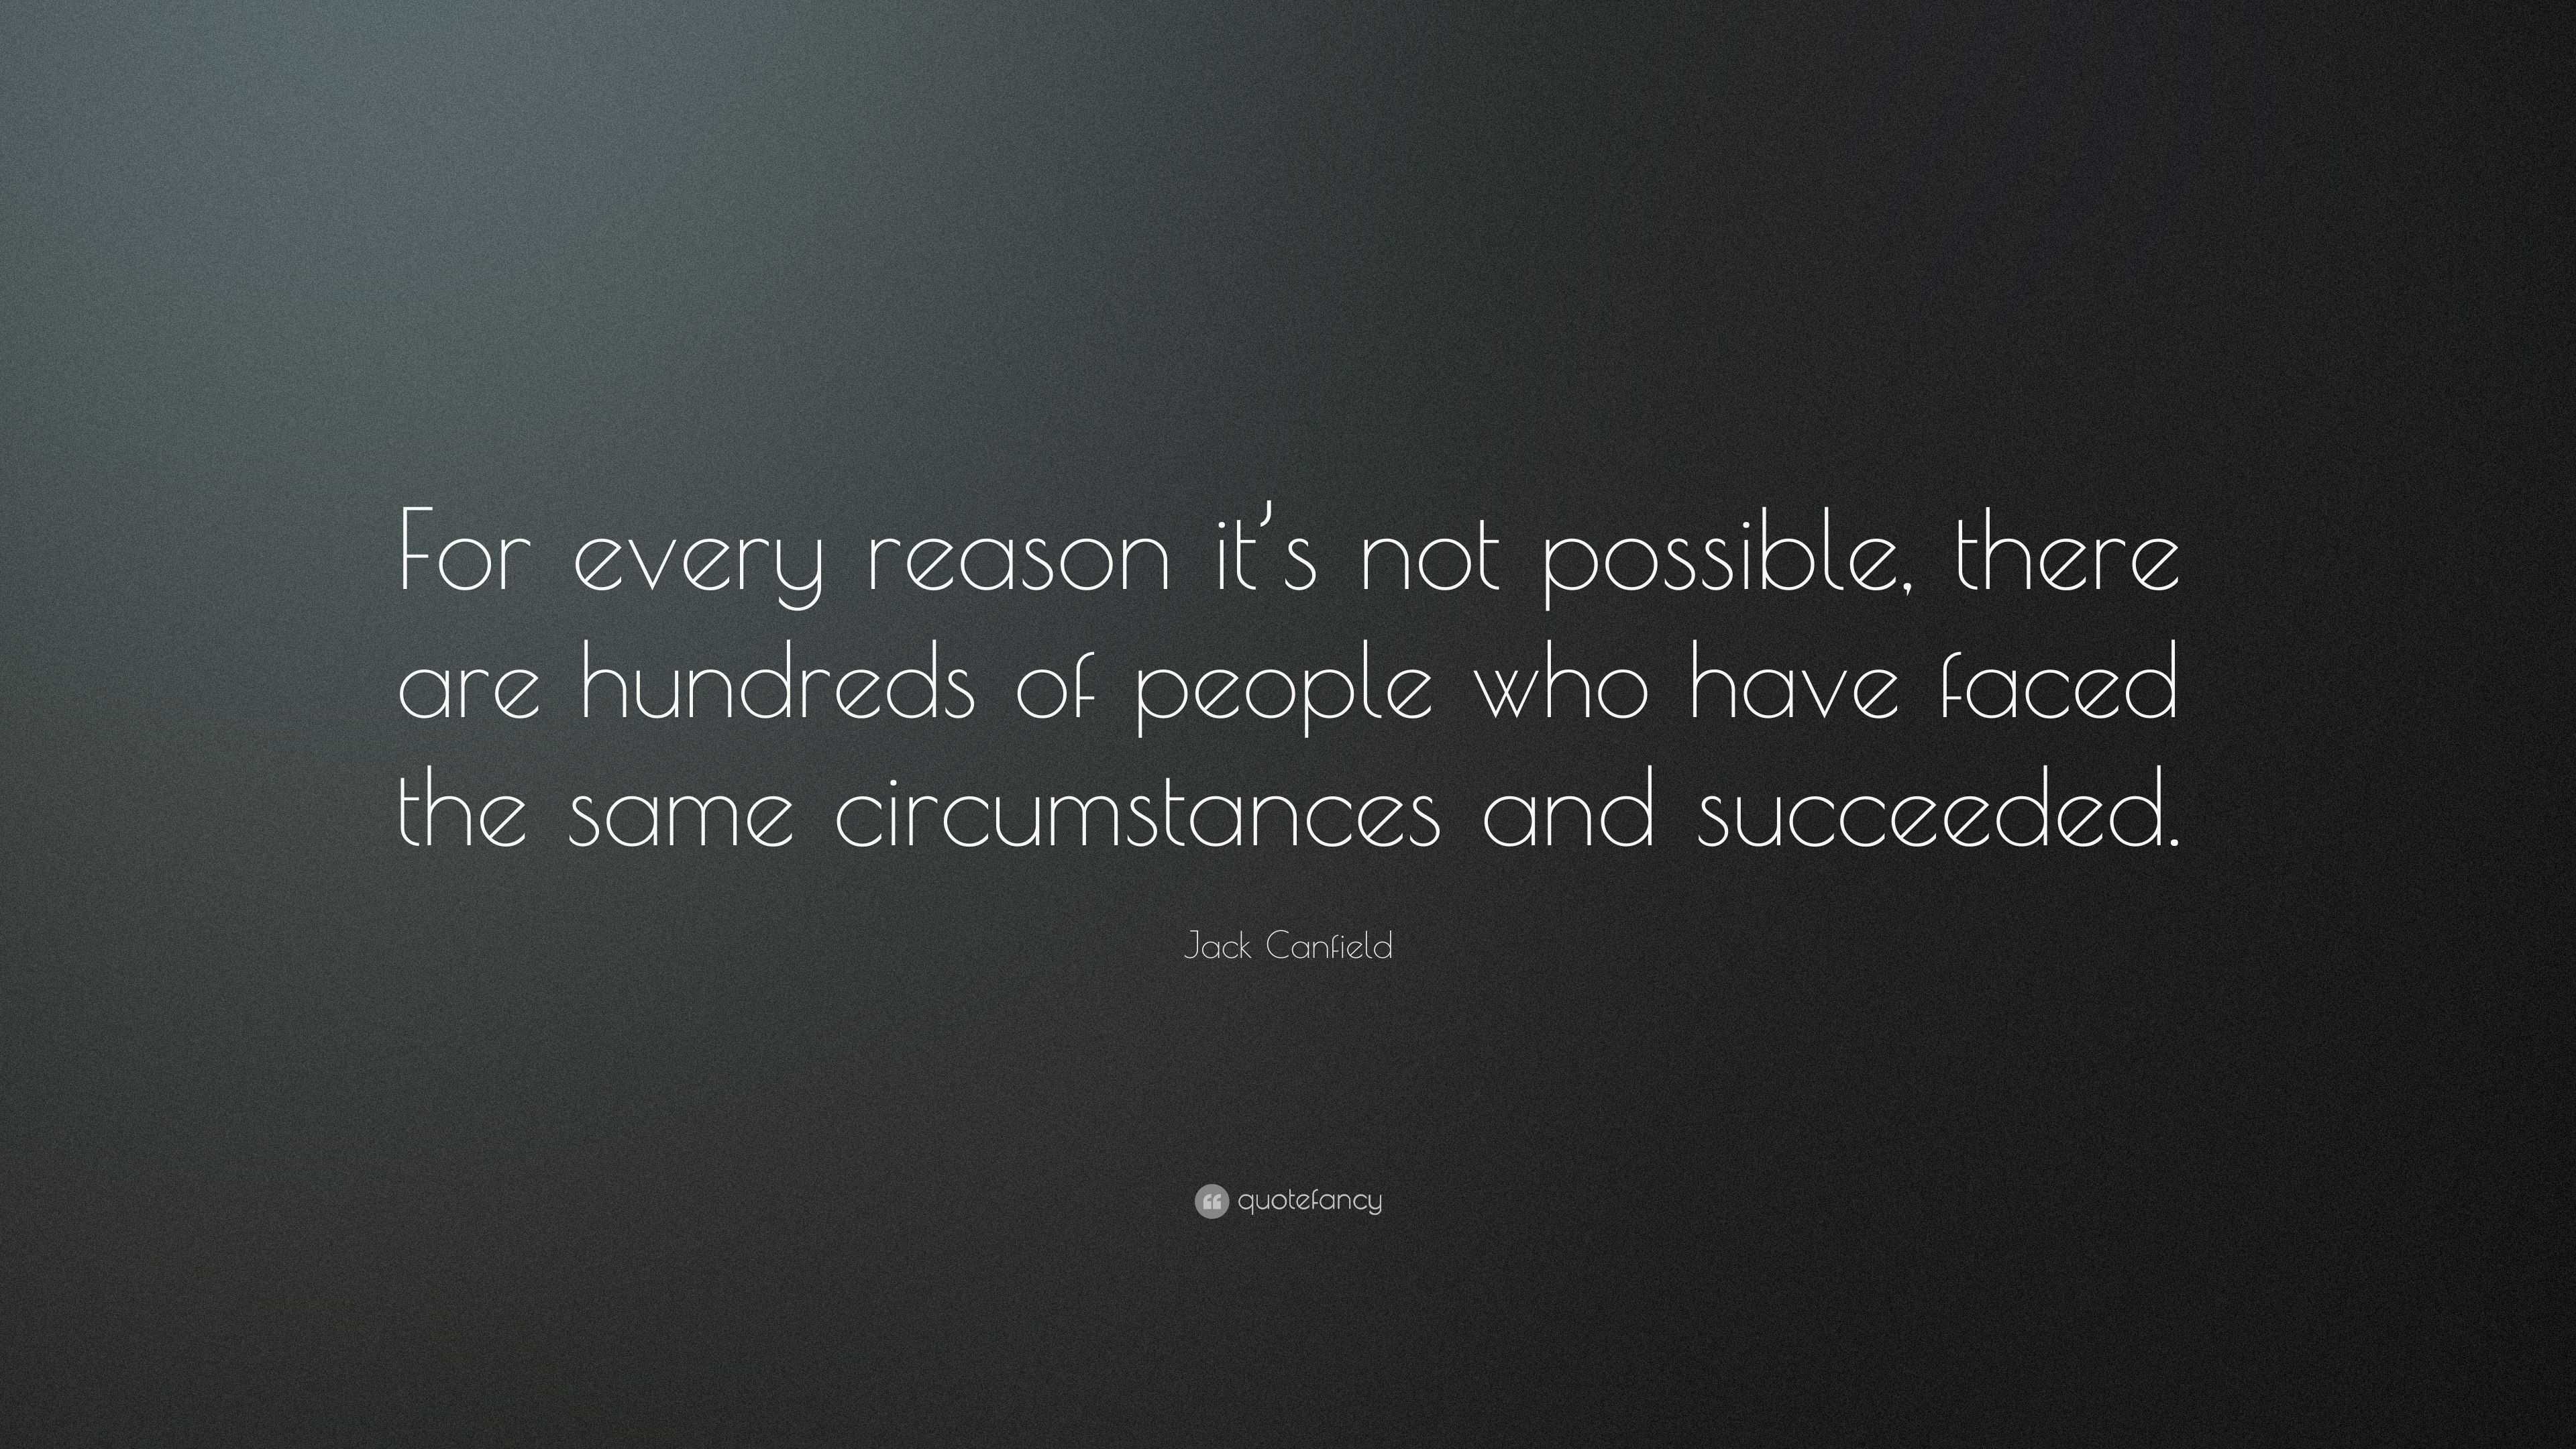 Jack Canfield Quote: “For every reason it’s not possible, there are ...